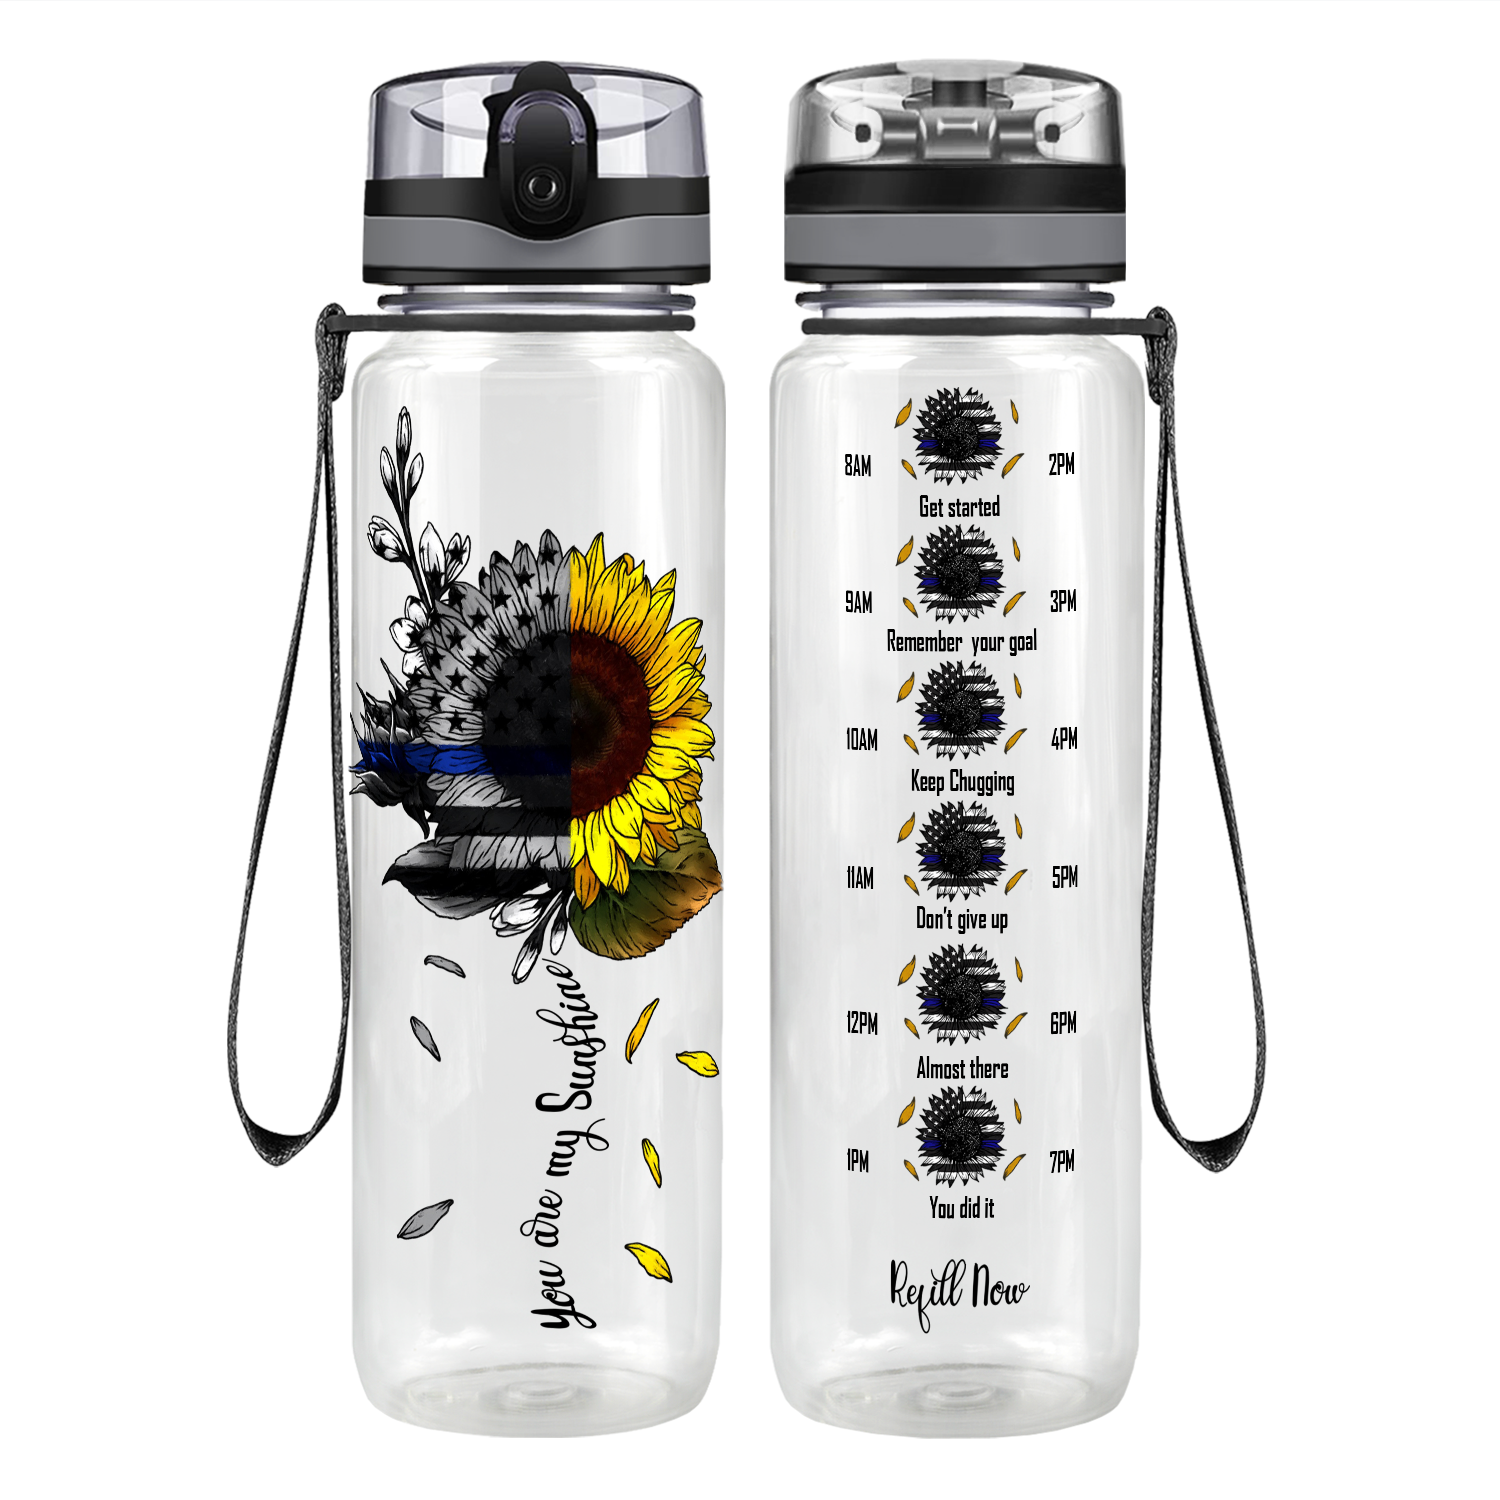 You are my Sunshine Thin Blue Line Sunflower Motivational Tracking Water Bottle